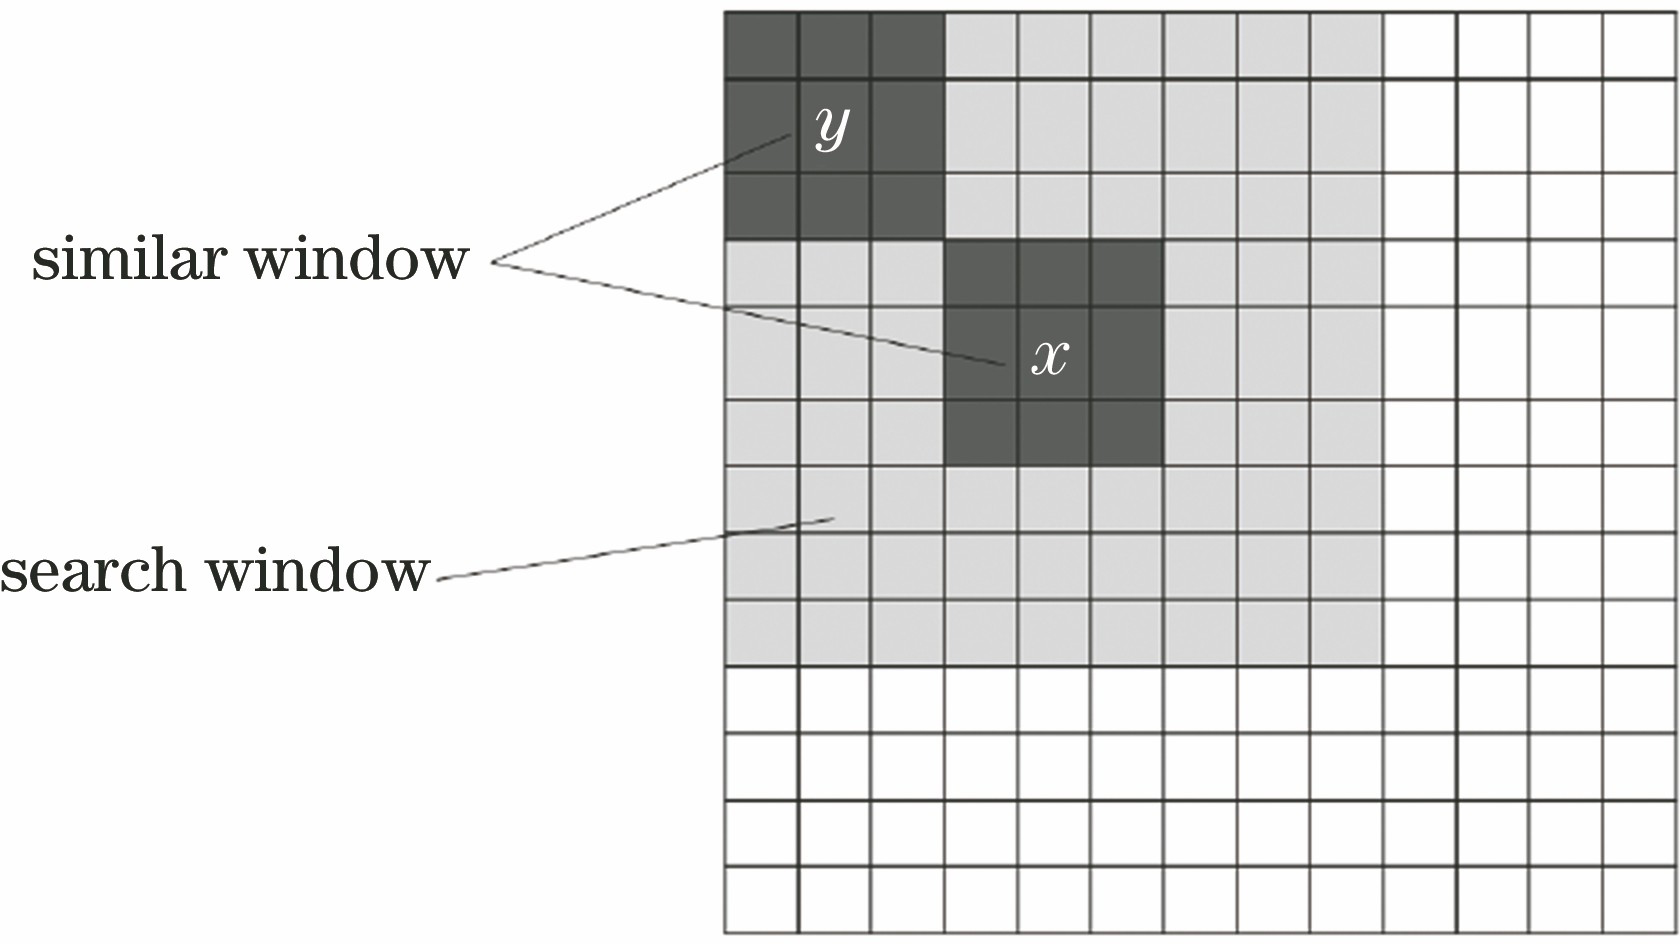 Relationship diagram of similar window and search window of NLM algorithm